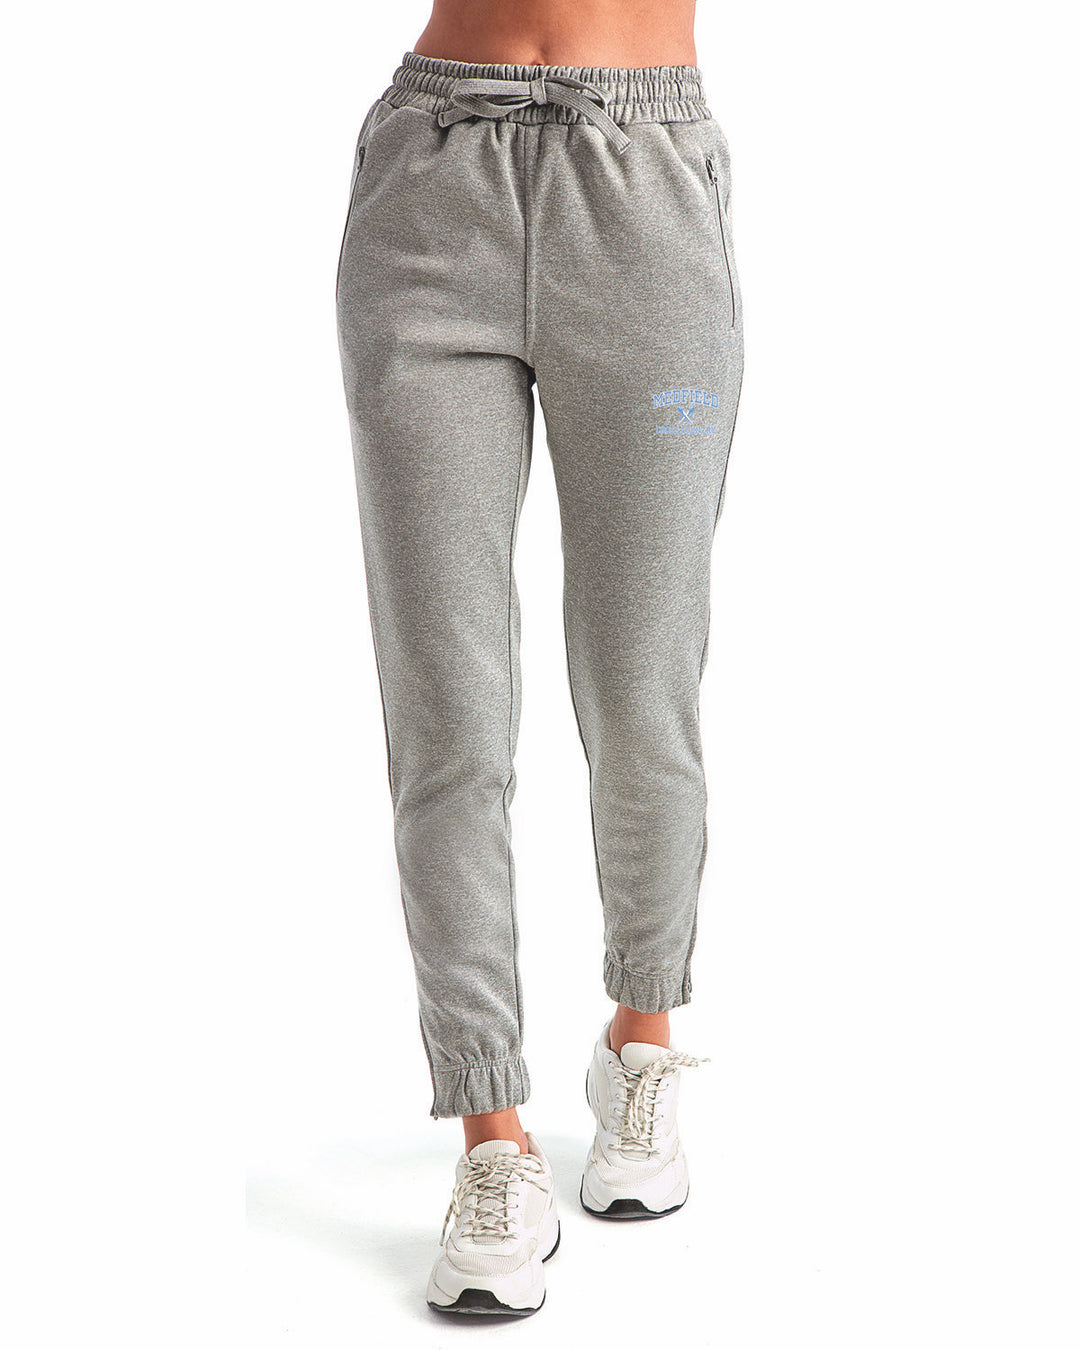 Medfield Cross Country Ladies' Spun Dyed Jogger (TD499)